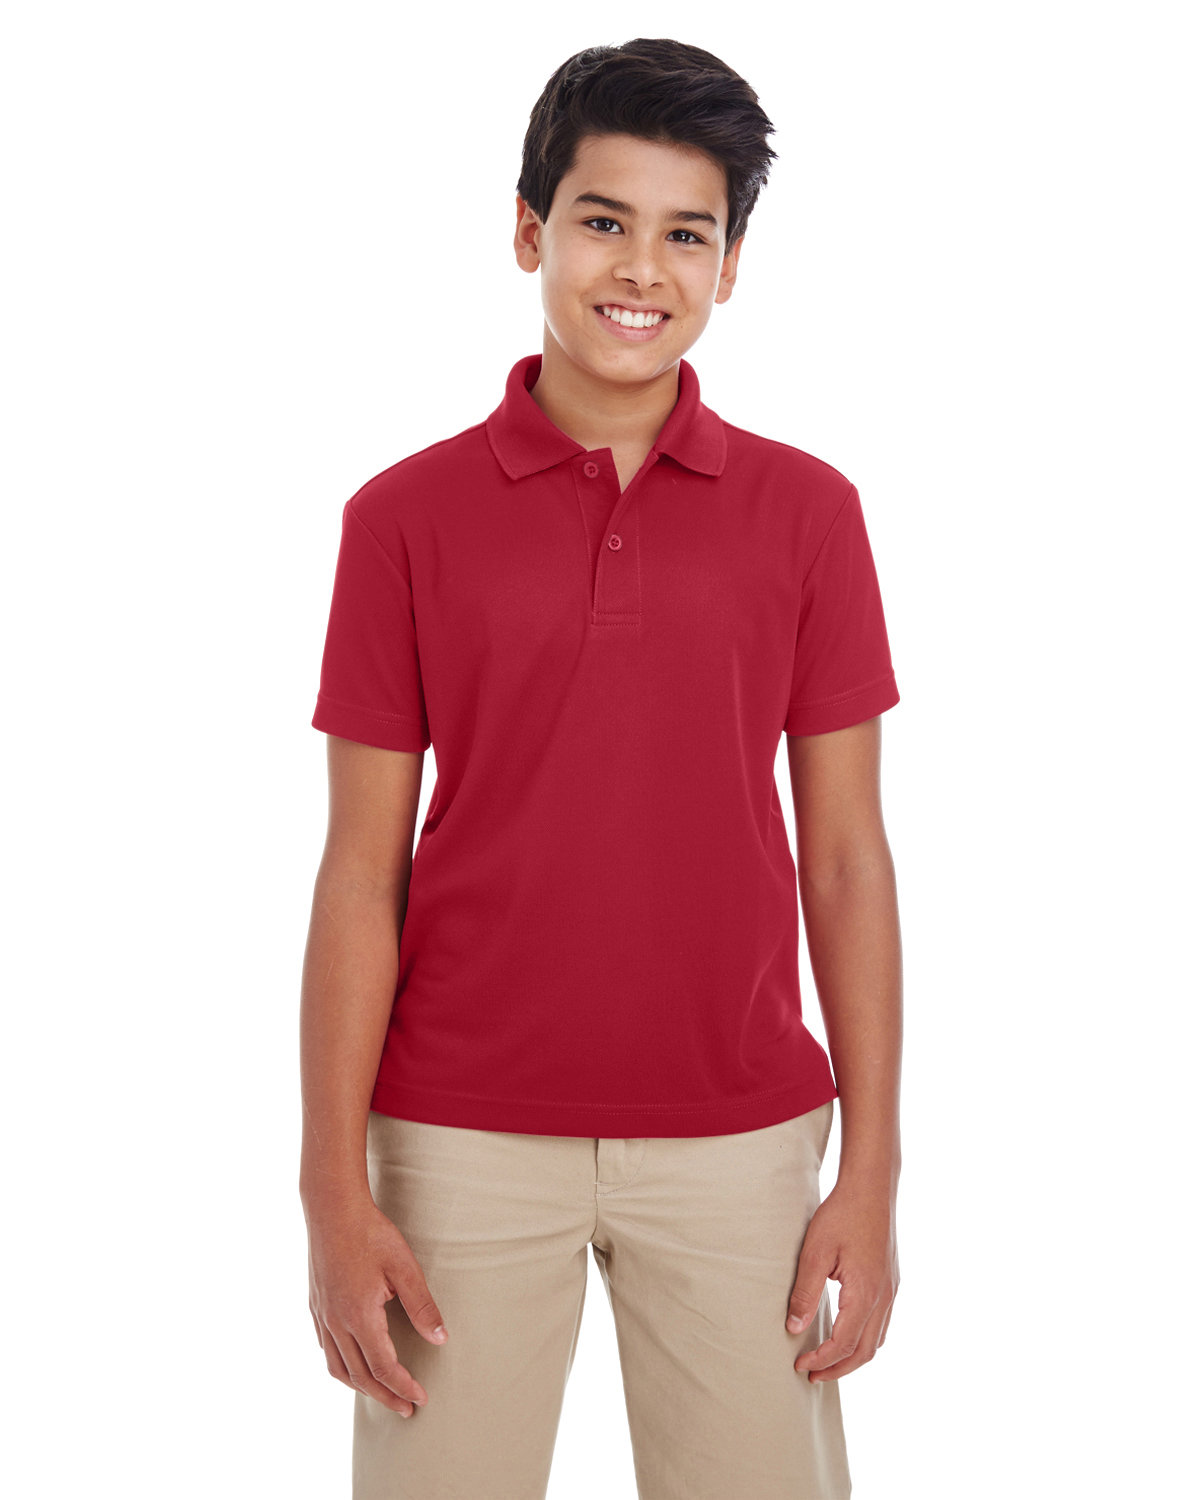 Core 365 Youth Origin Performance Piqué Polo CLASSIC RED 